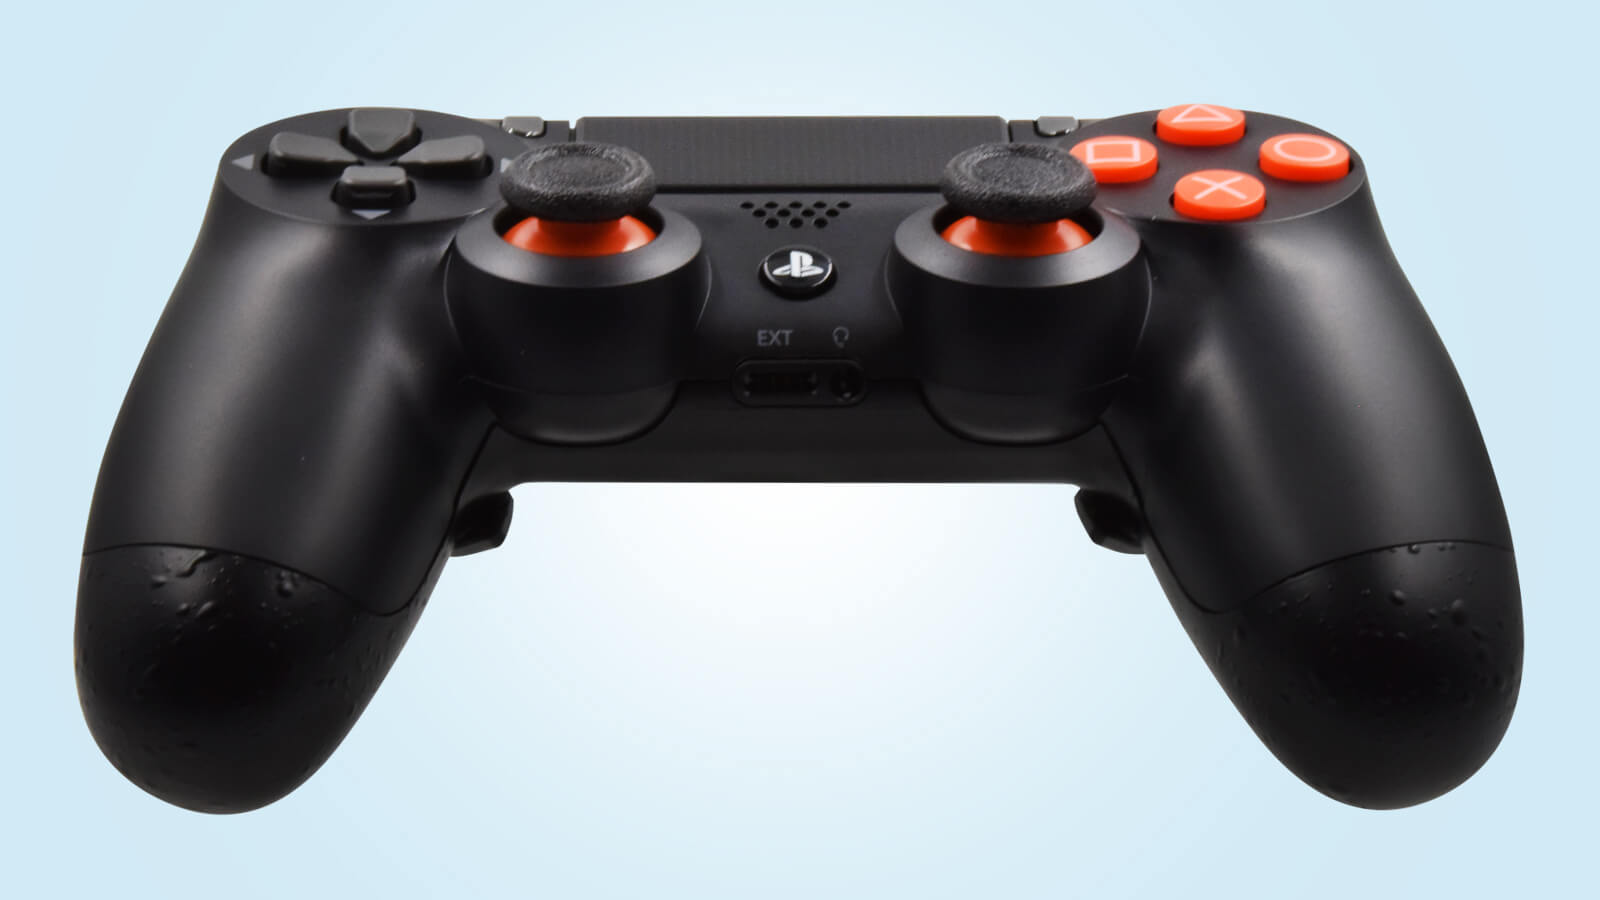 Meet The All-New Mega Modz PS4 Macro Controller - Personalize Your Gameplay Like Never Before.